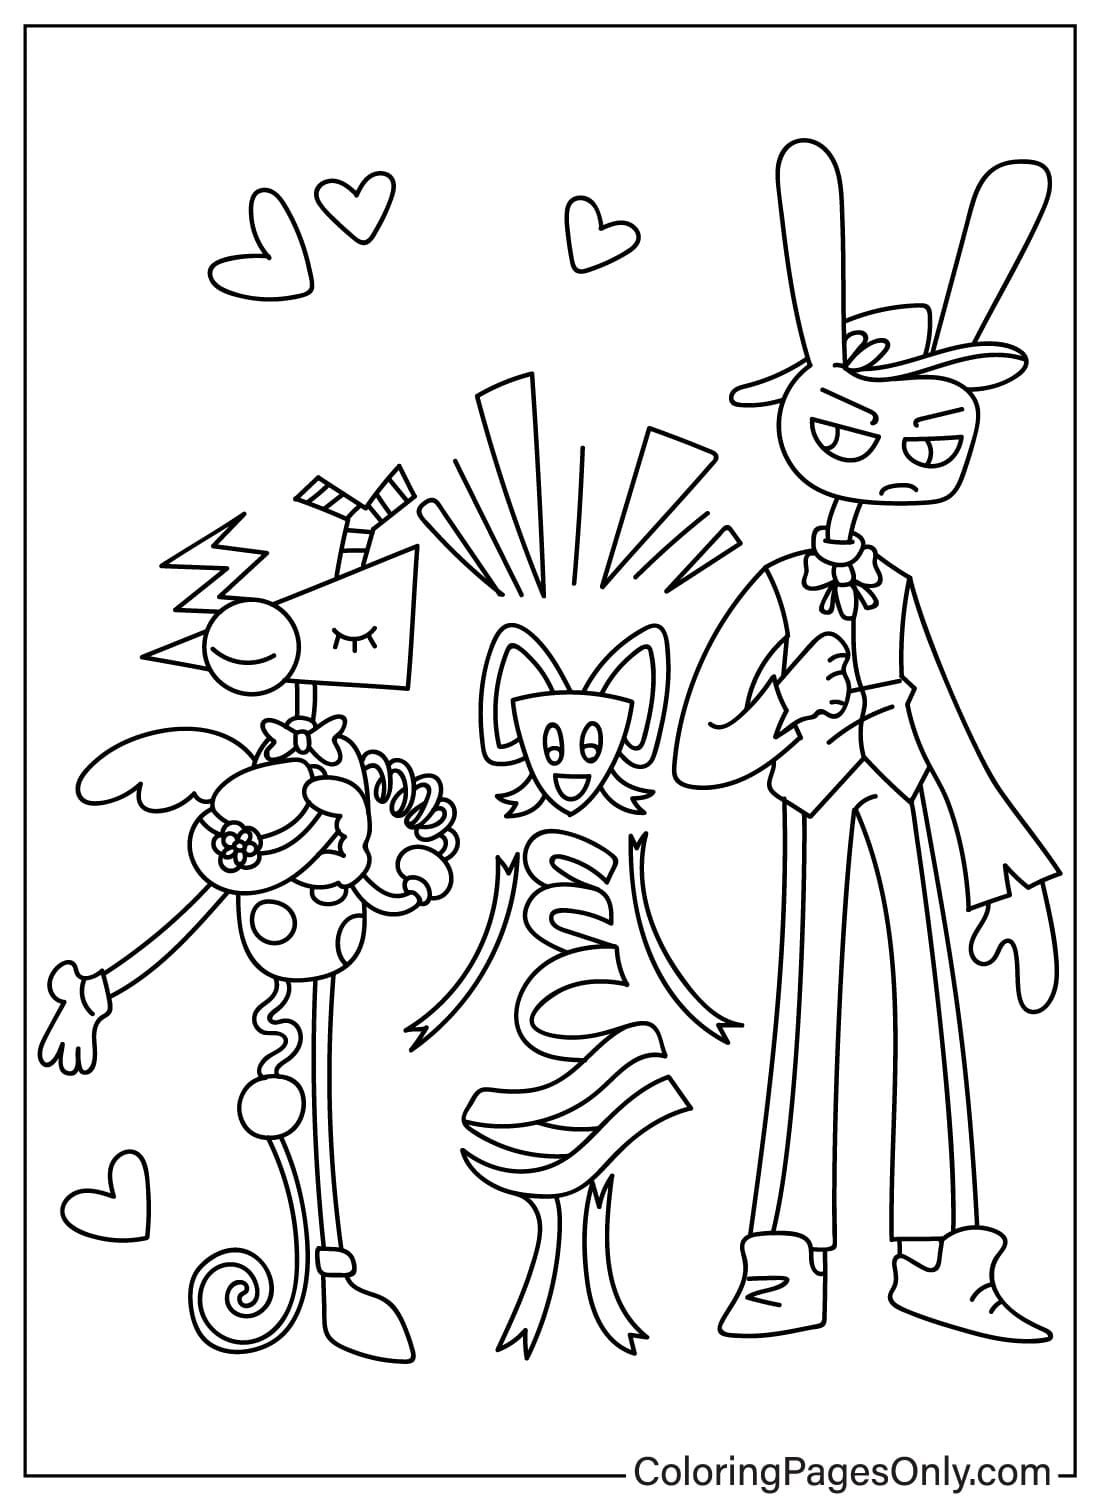 Zooble, Jax and Gangle Coloring Page from Gangle